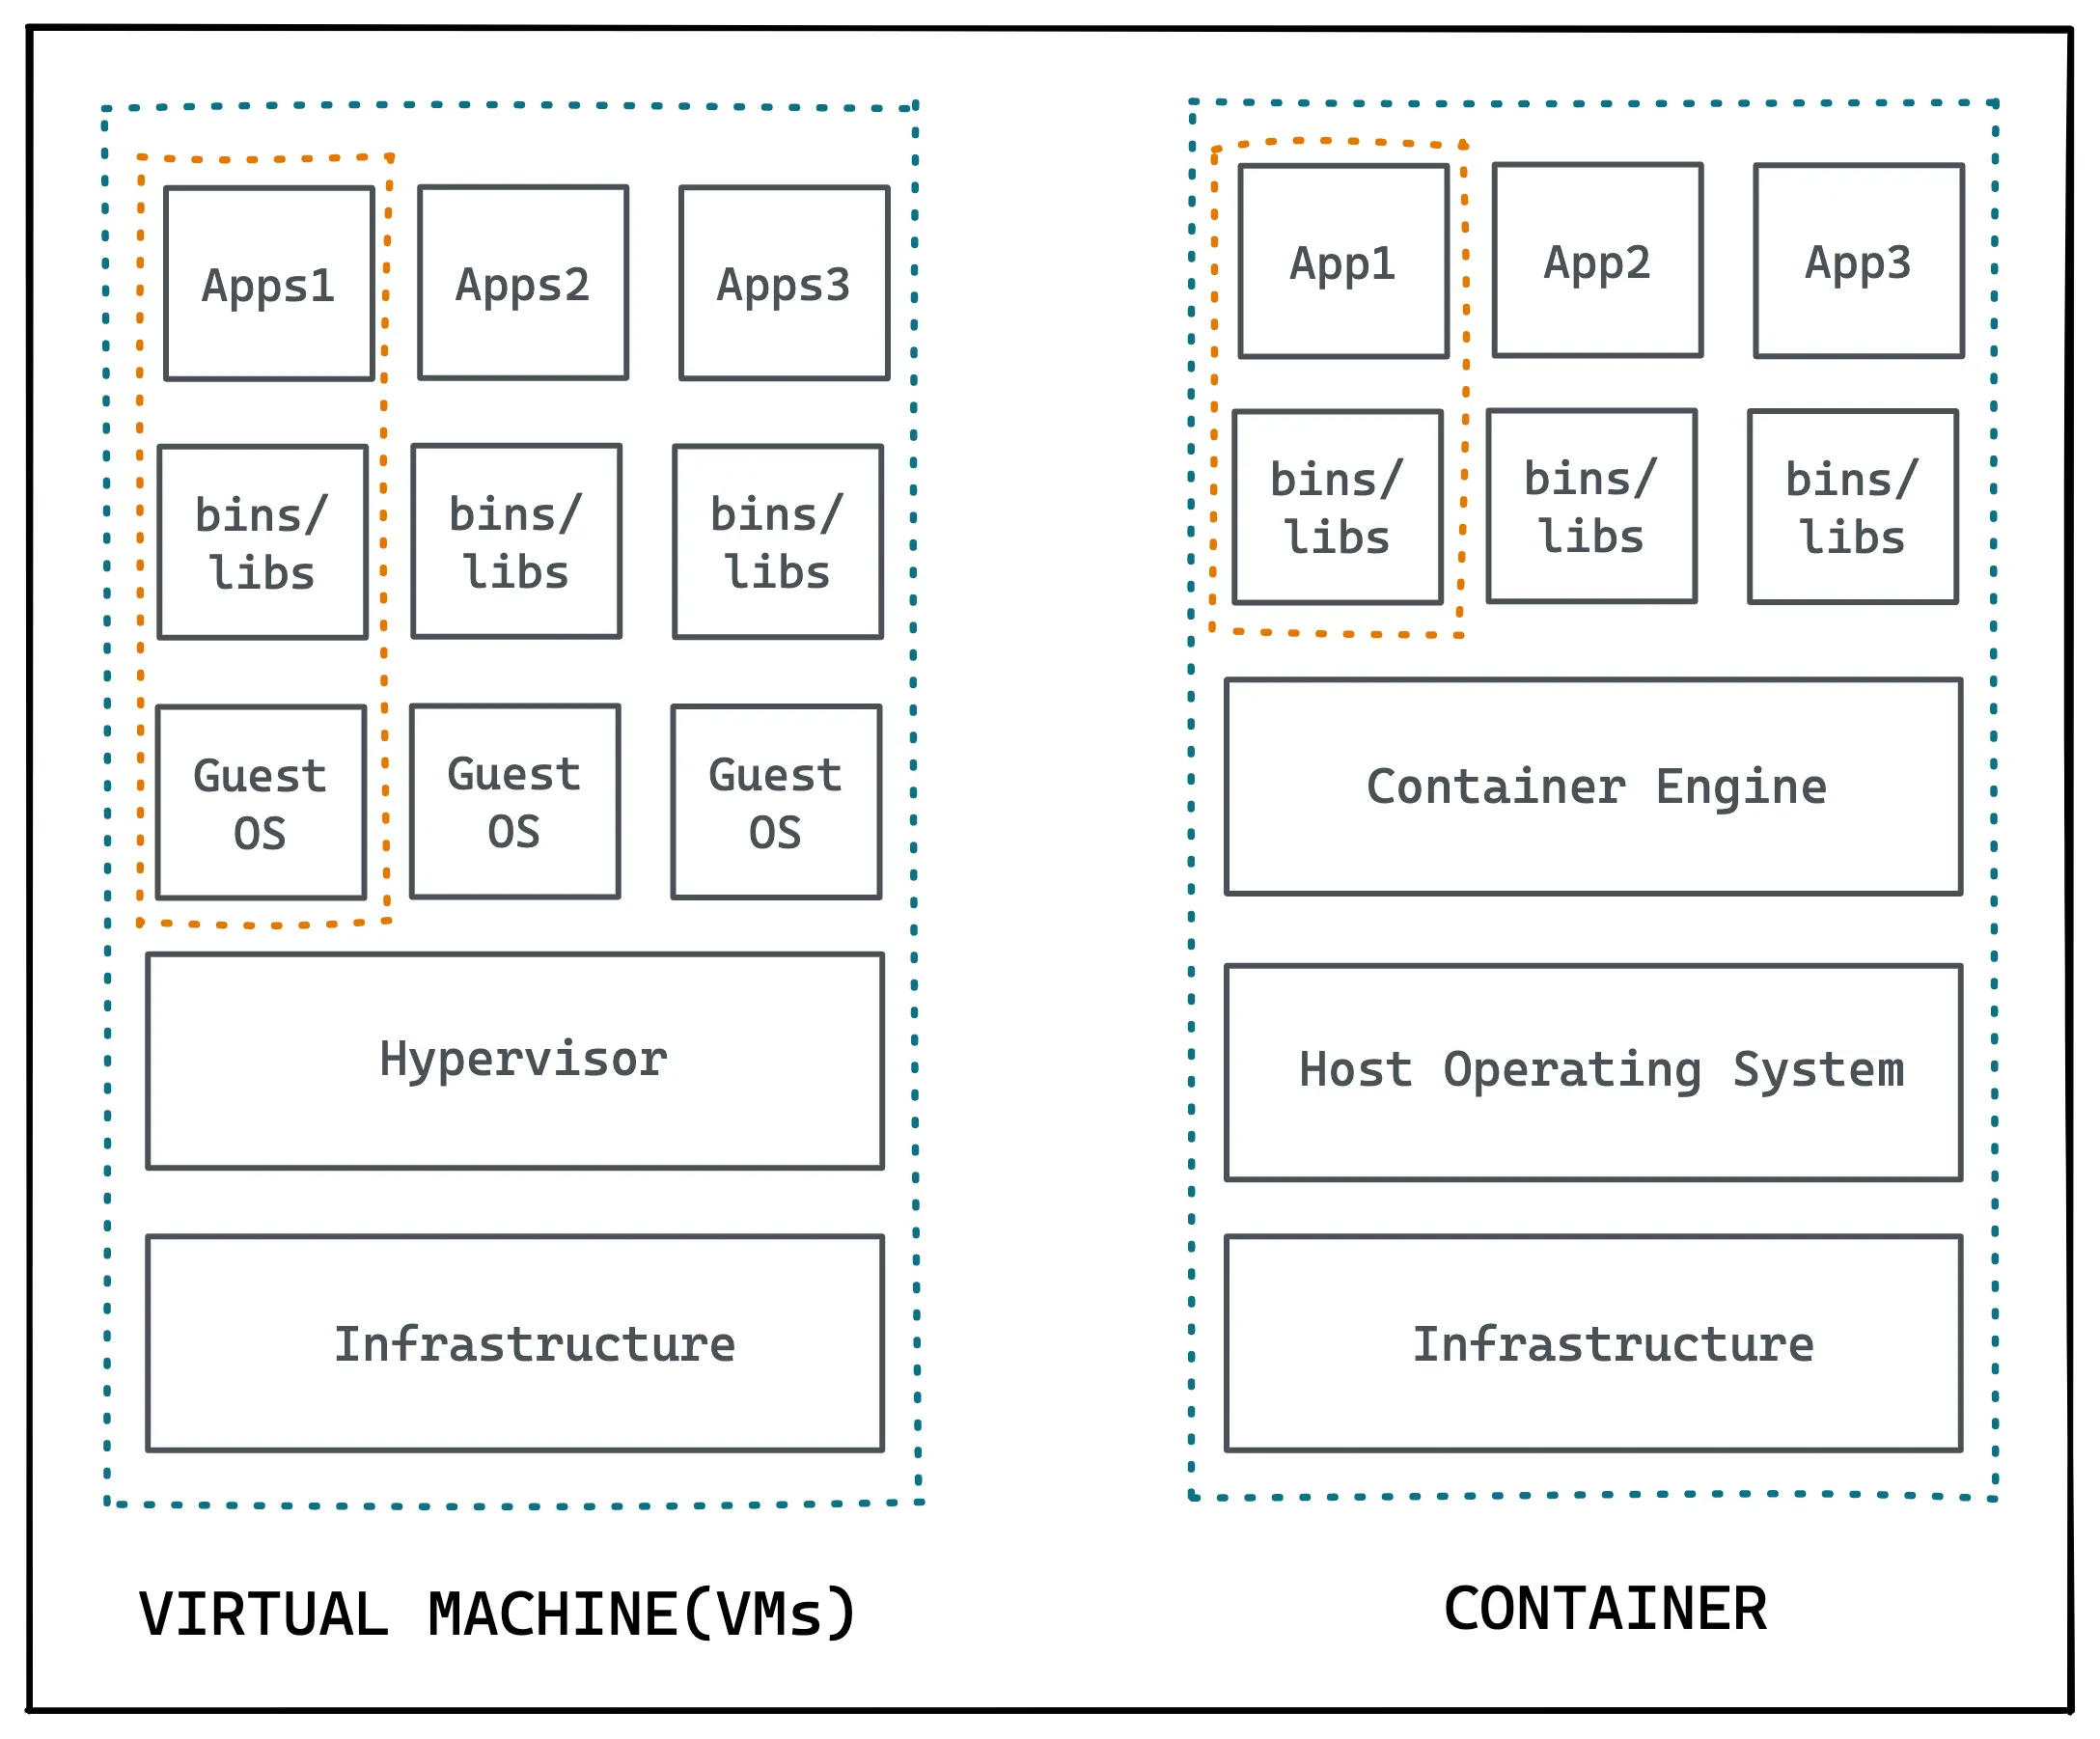 Differences between Virtual Machines and Containers